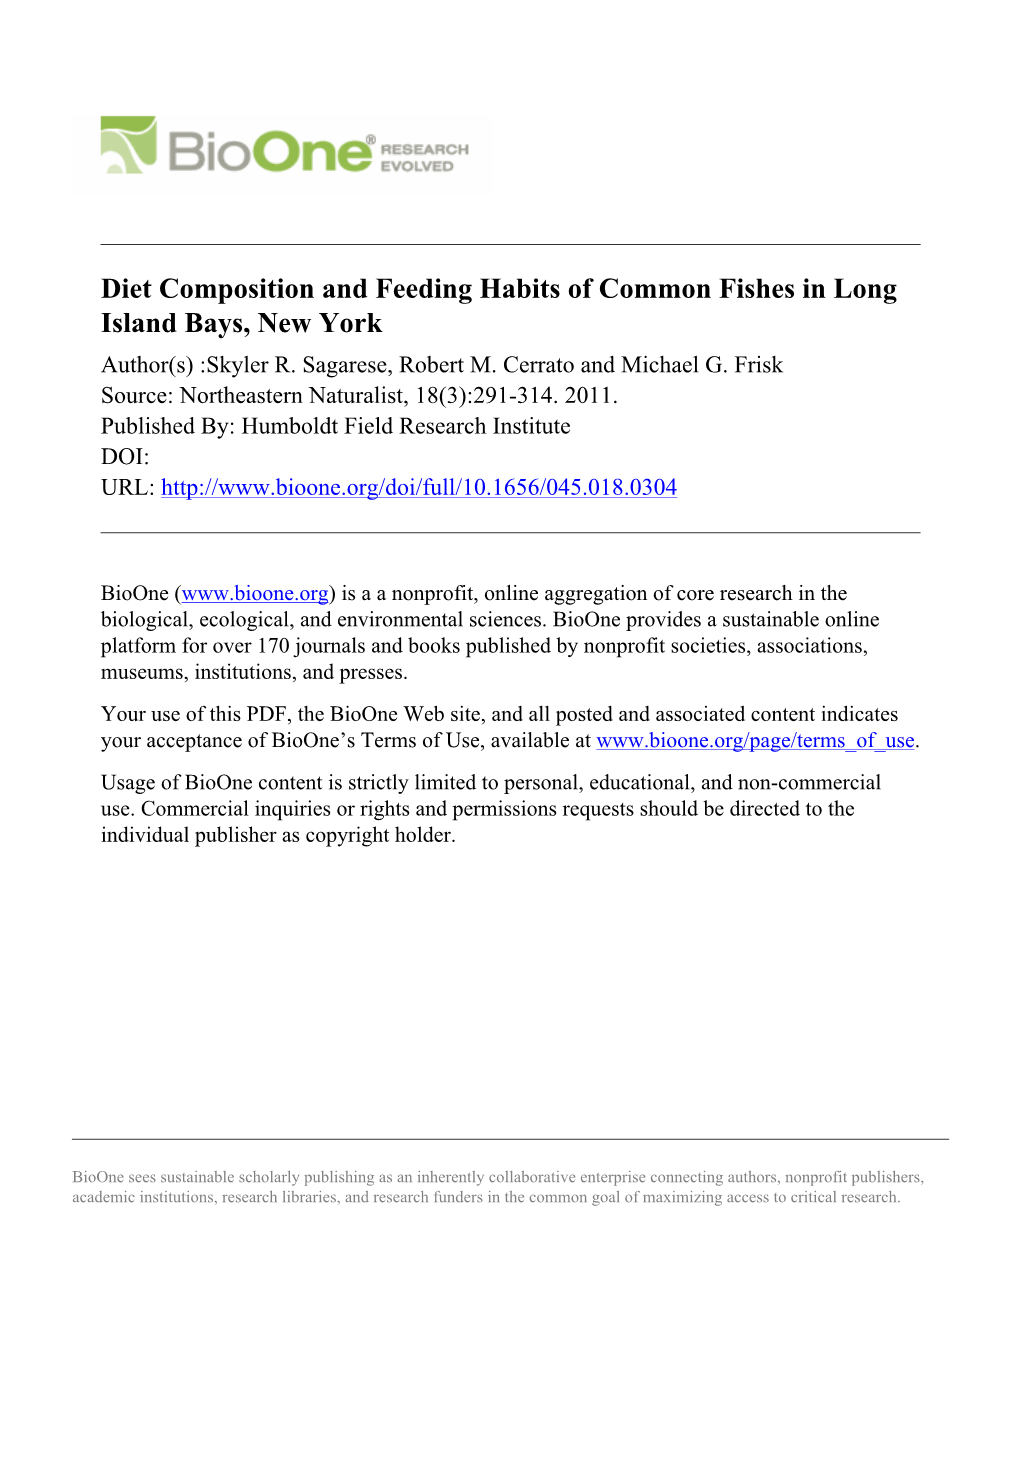 Diet Composition and Feeding Habits of Common Fishes in Long Island Bays, New York Author(S) :Skyler R